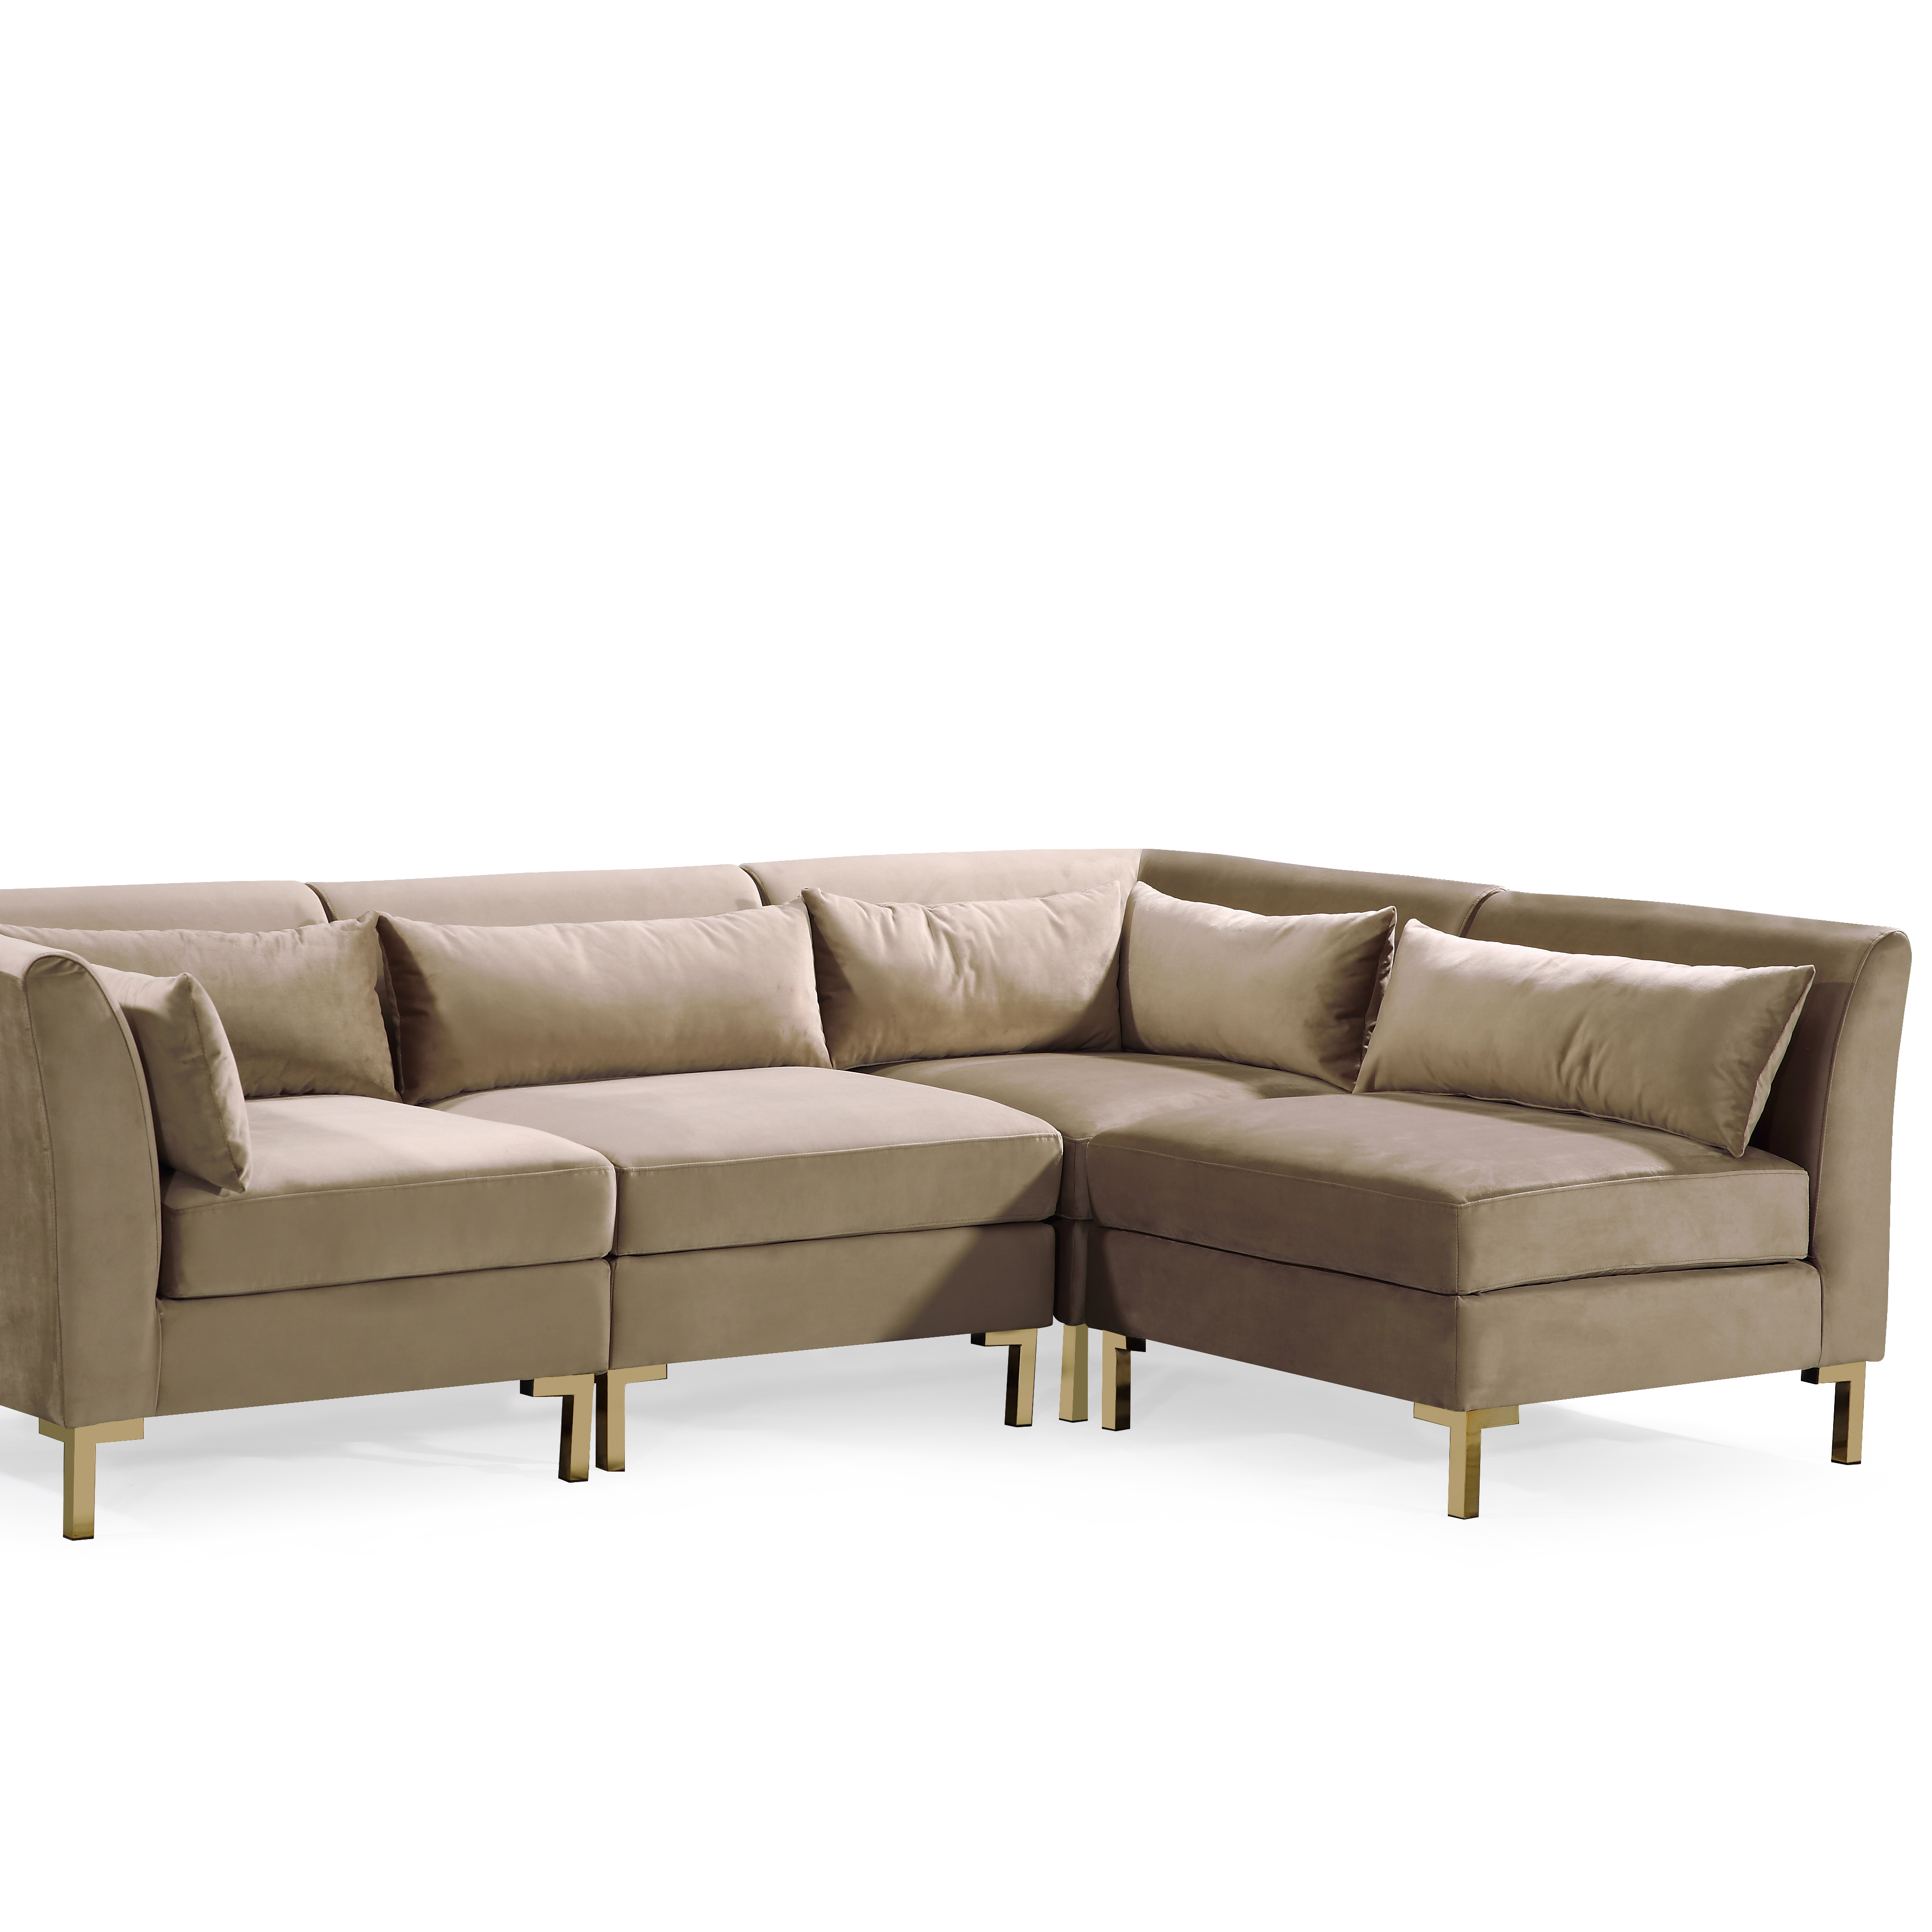 Greco Modular Chaise Sectional Sofa Solid Gold Tone Metal Y-Leg With 6 Throw Pillows - Taupe